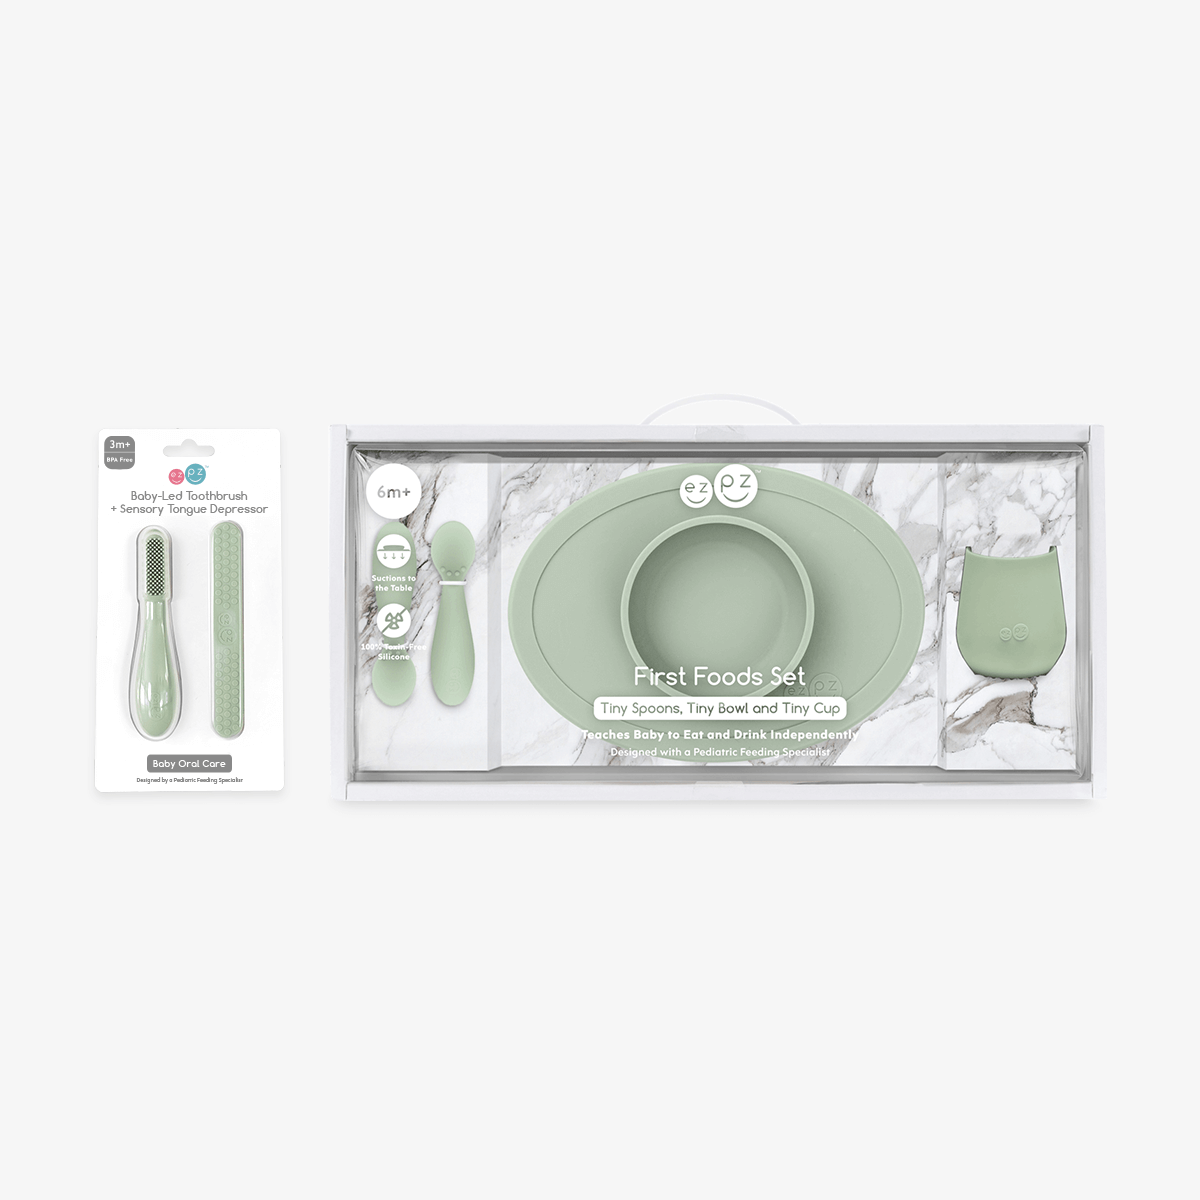 First Foods Oral Care Bundle in Sage Green / ezpz Baby-Led™ Toothbrush + Sensory Tongue Depressor Dual Pack and First Foods Set